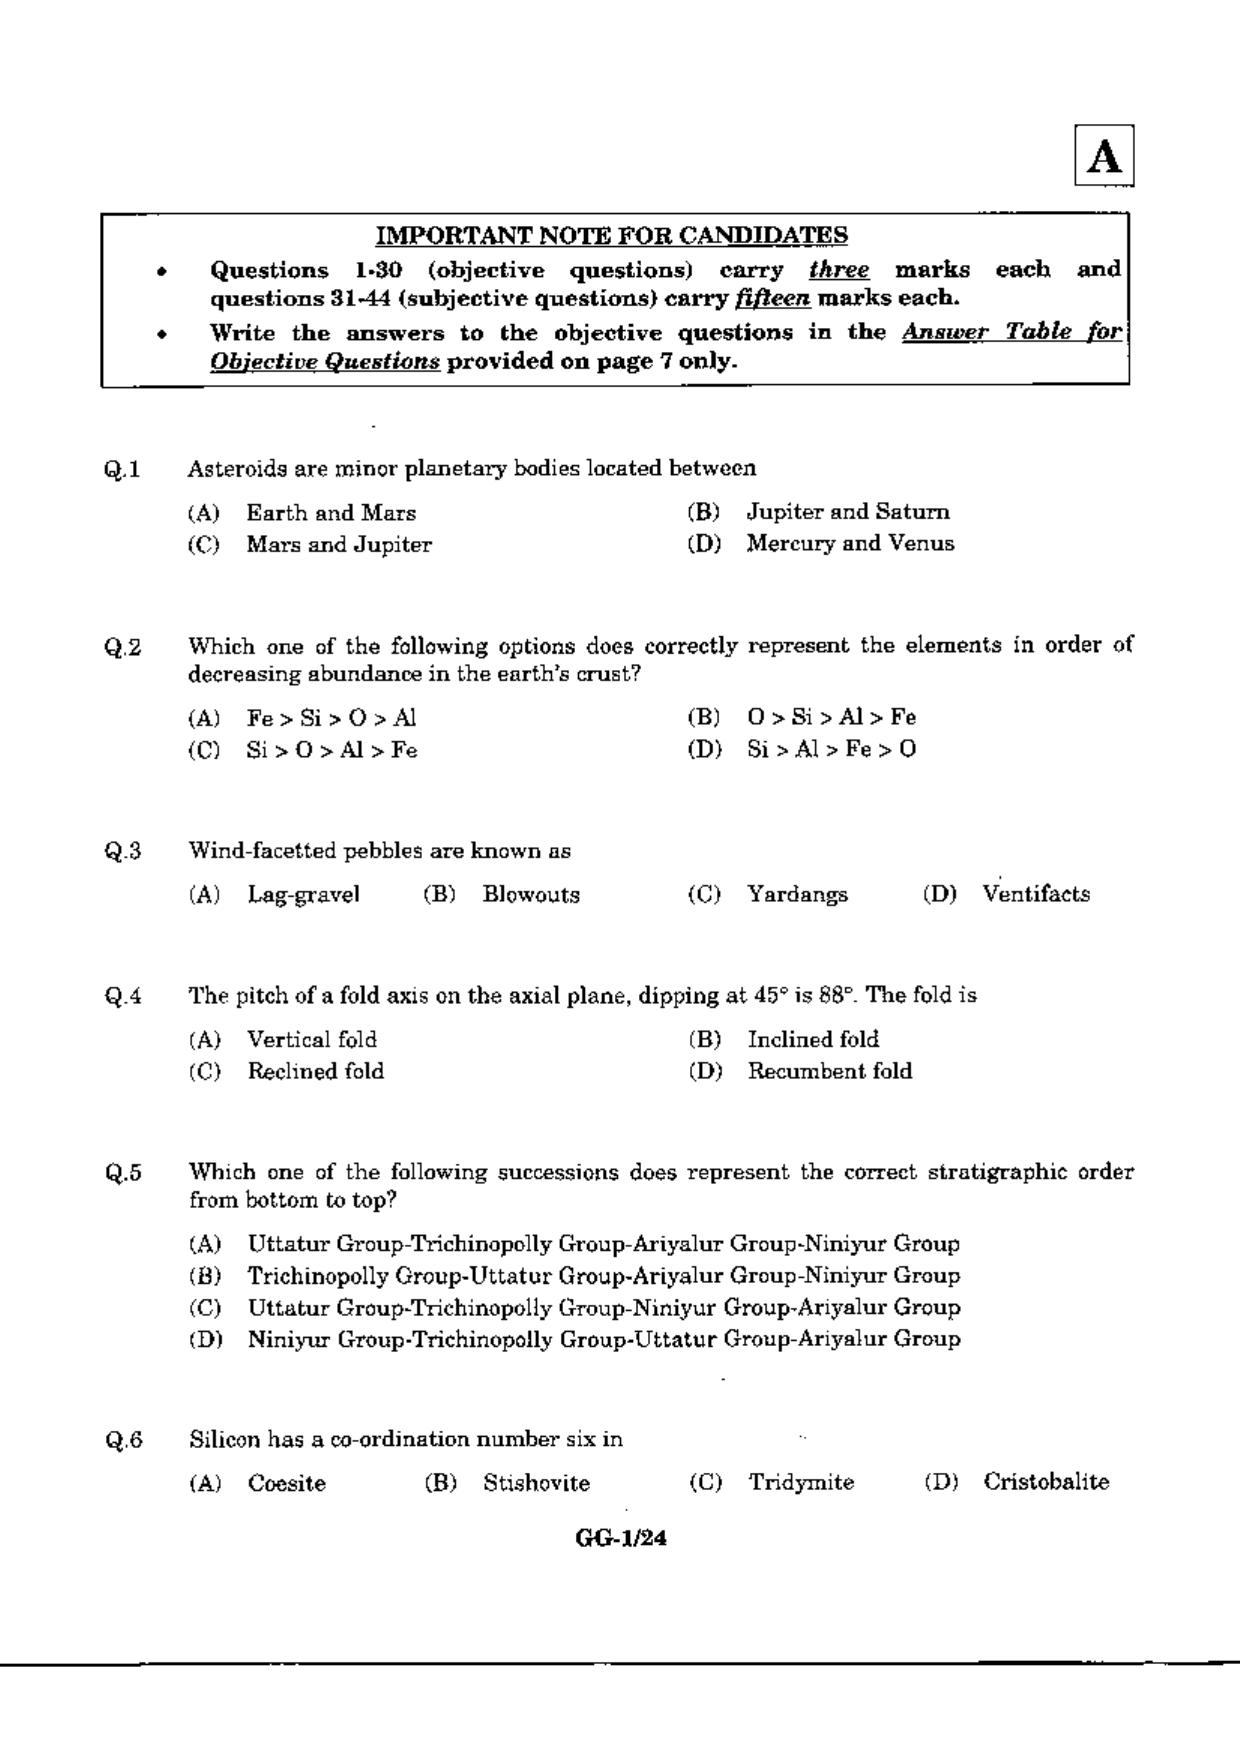 JAM 2010: GG Question Paper - Page 3